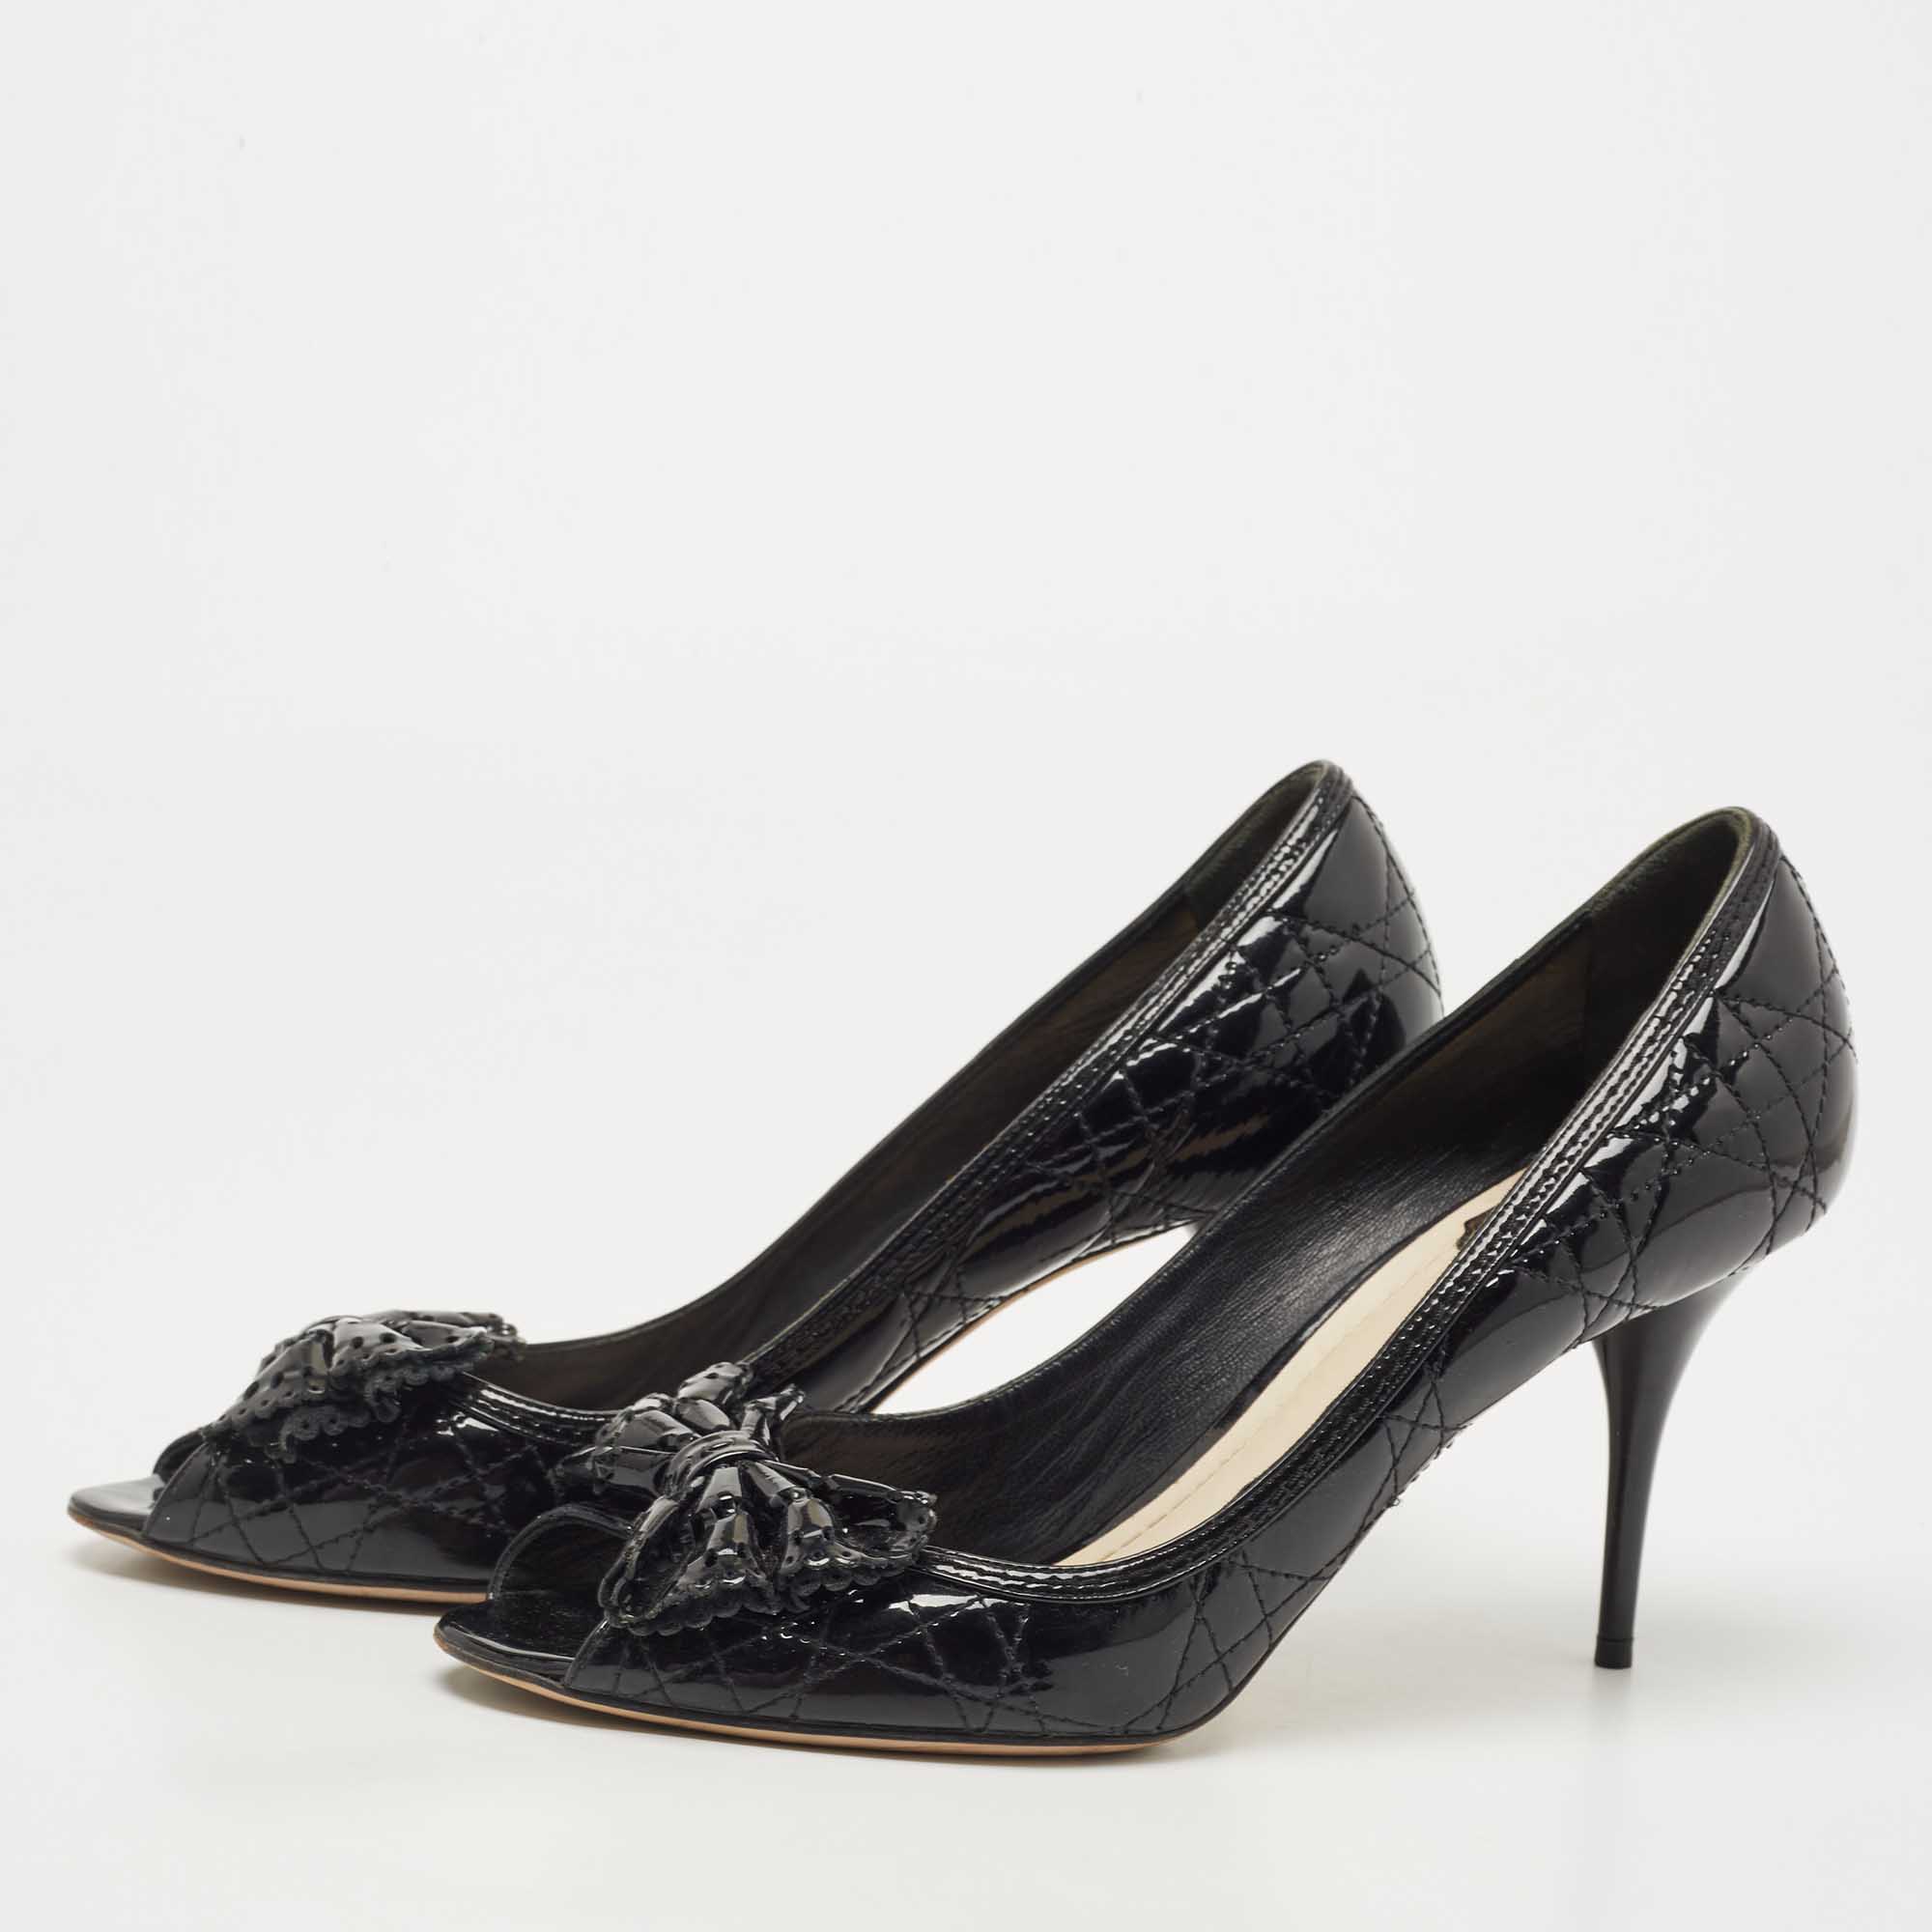 

Dior Black Cannage Patent Leather Bow Peep Toe Pumps Size